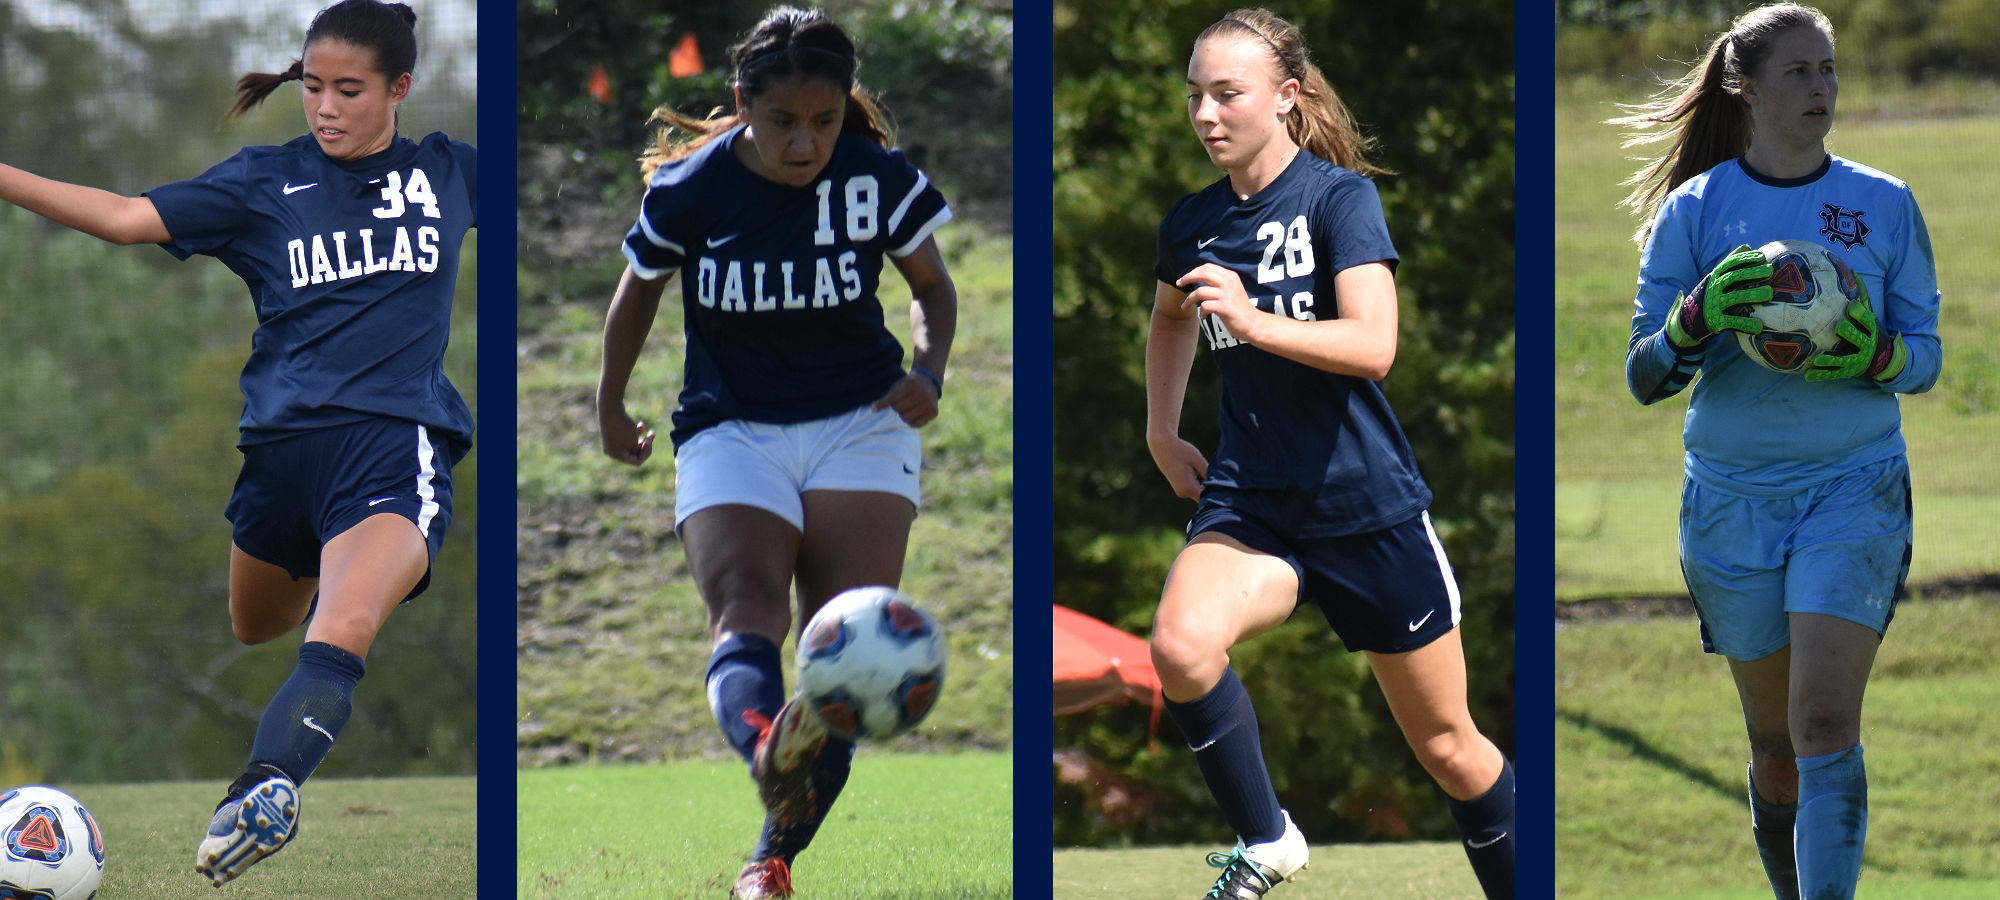 Quartet of Crusaders Named on Women's Soccer All-SCAC Teams